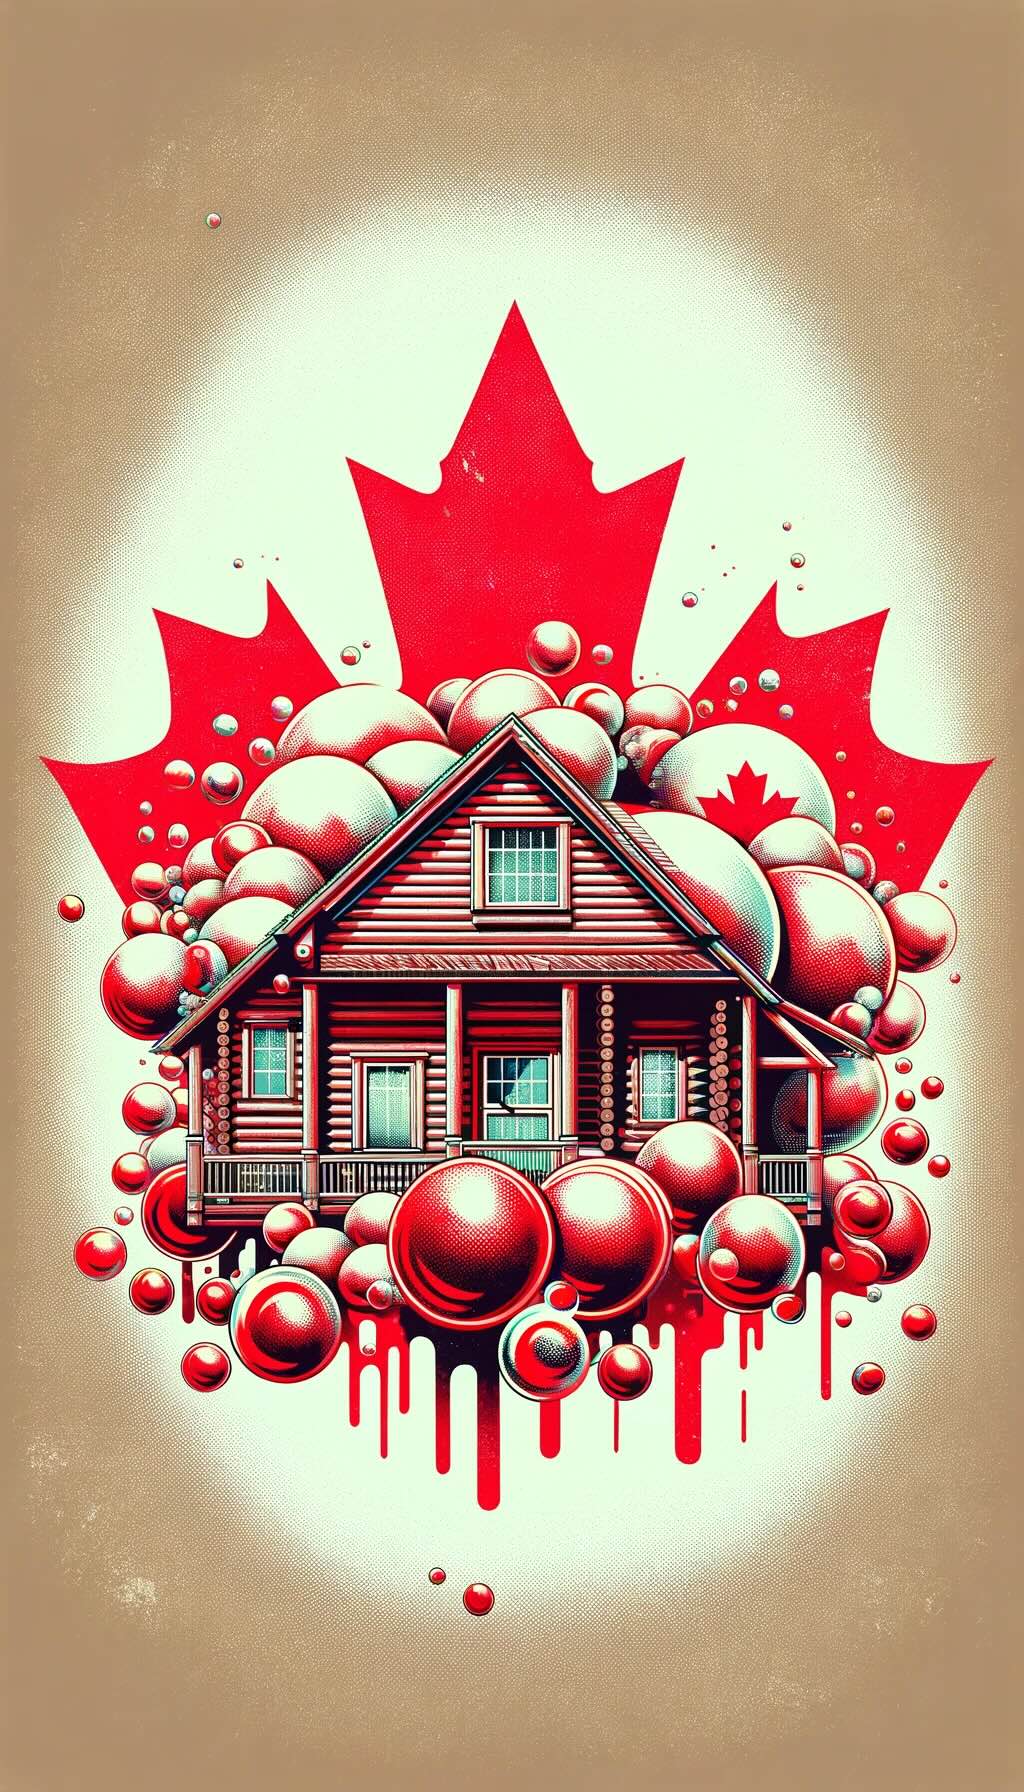 Depicting the Crazy Canada Housing Bubble with vintage Canadian log cabin surrounded by bursting bubbles, symbolizing the volatility of the housing market